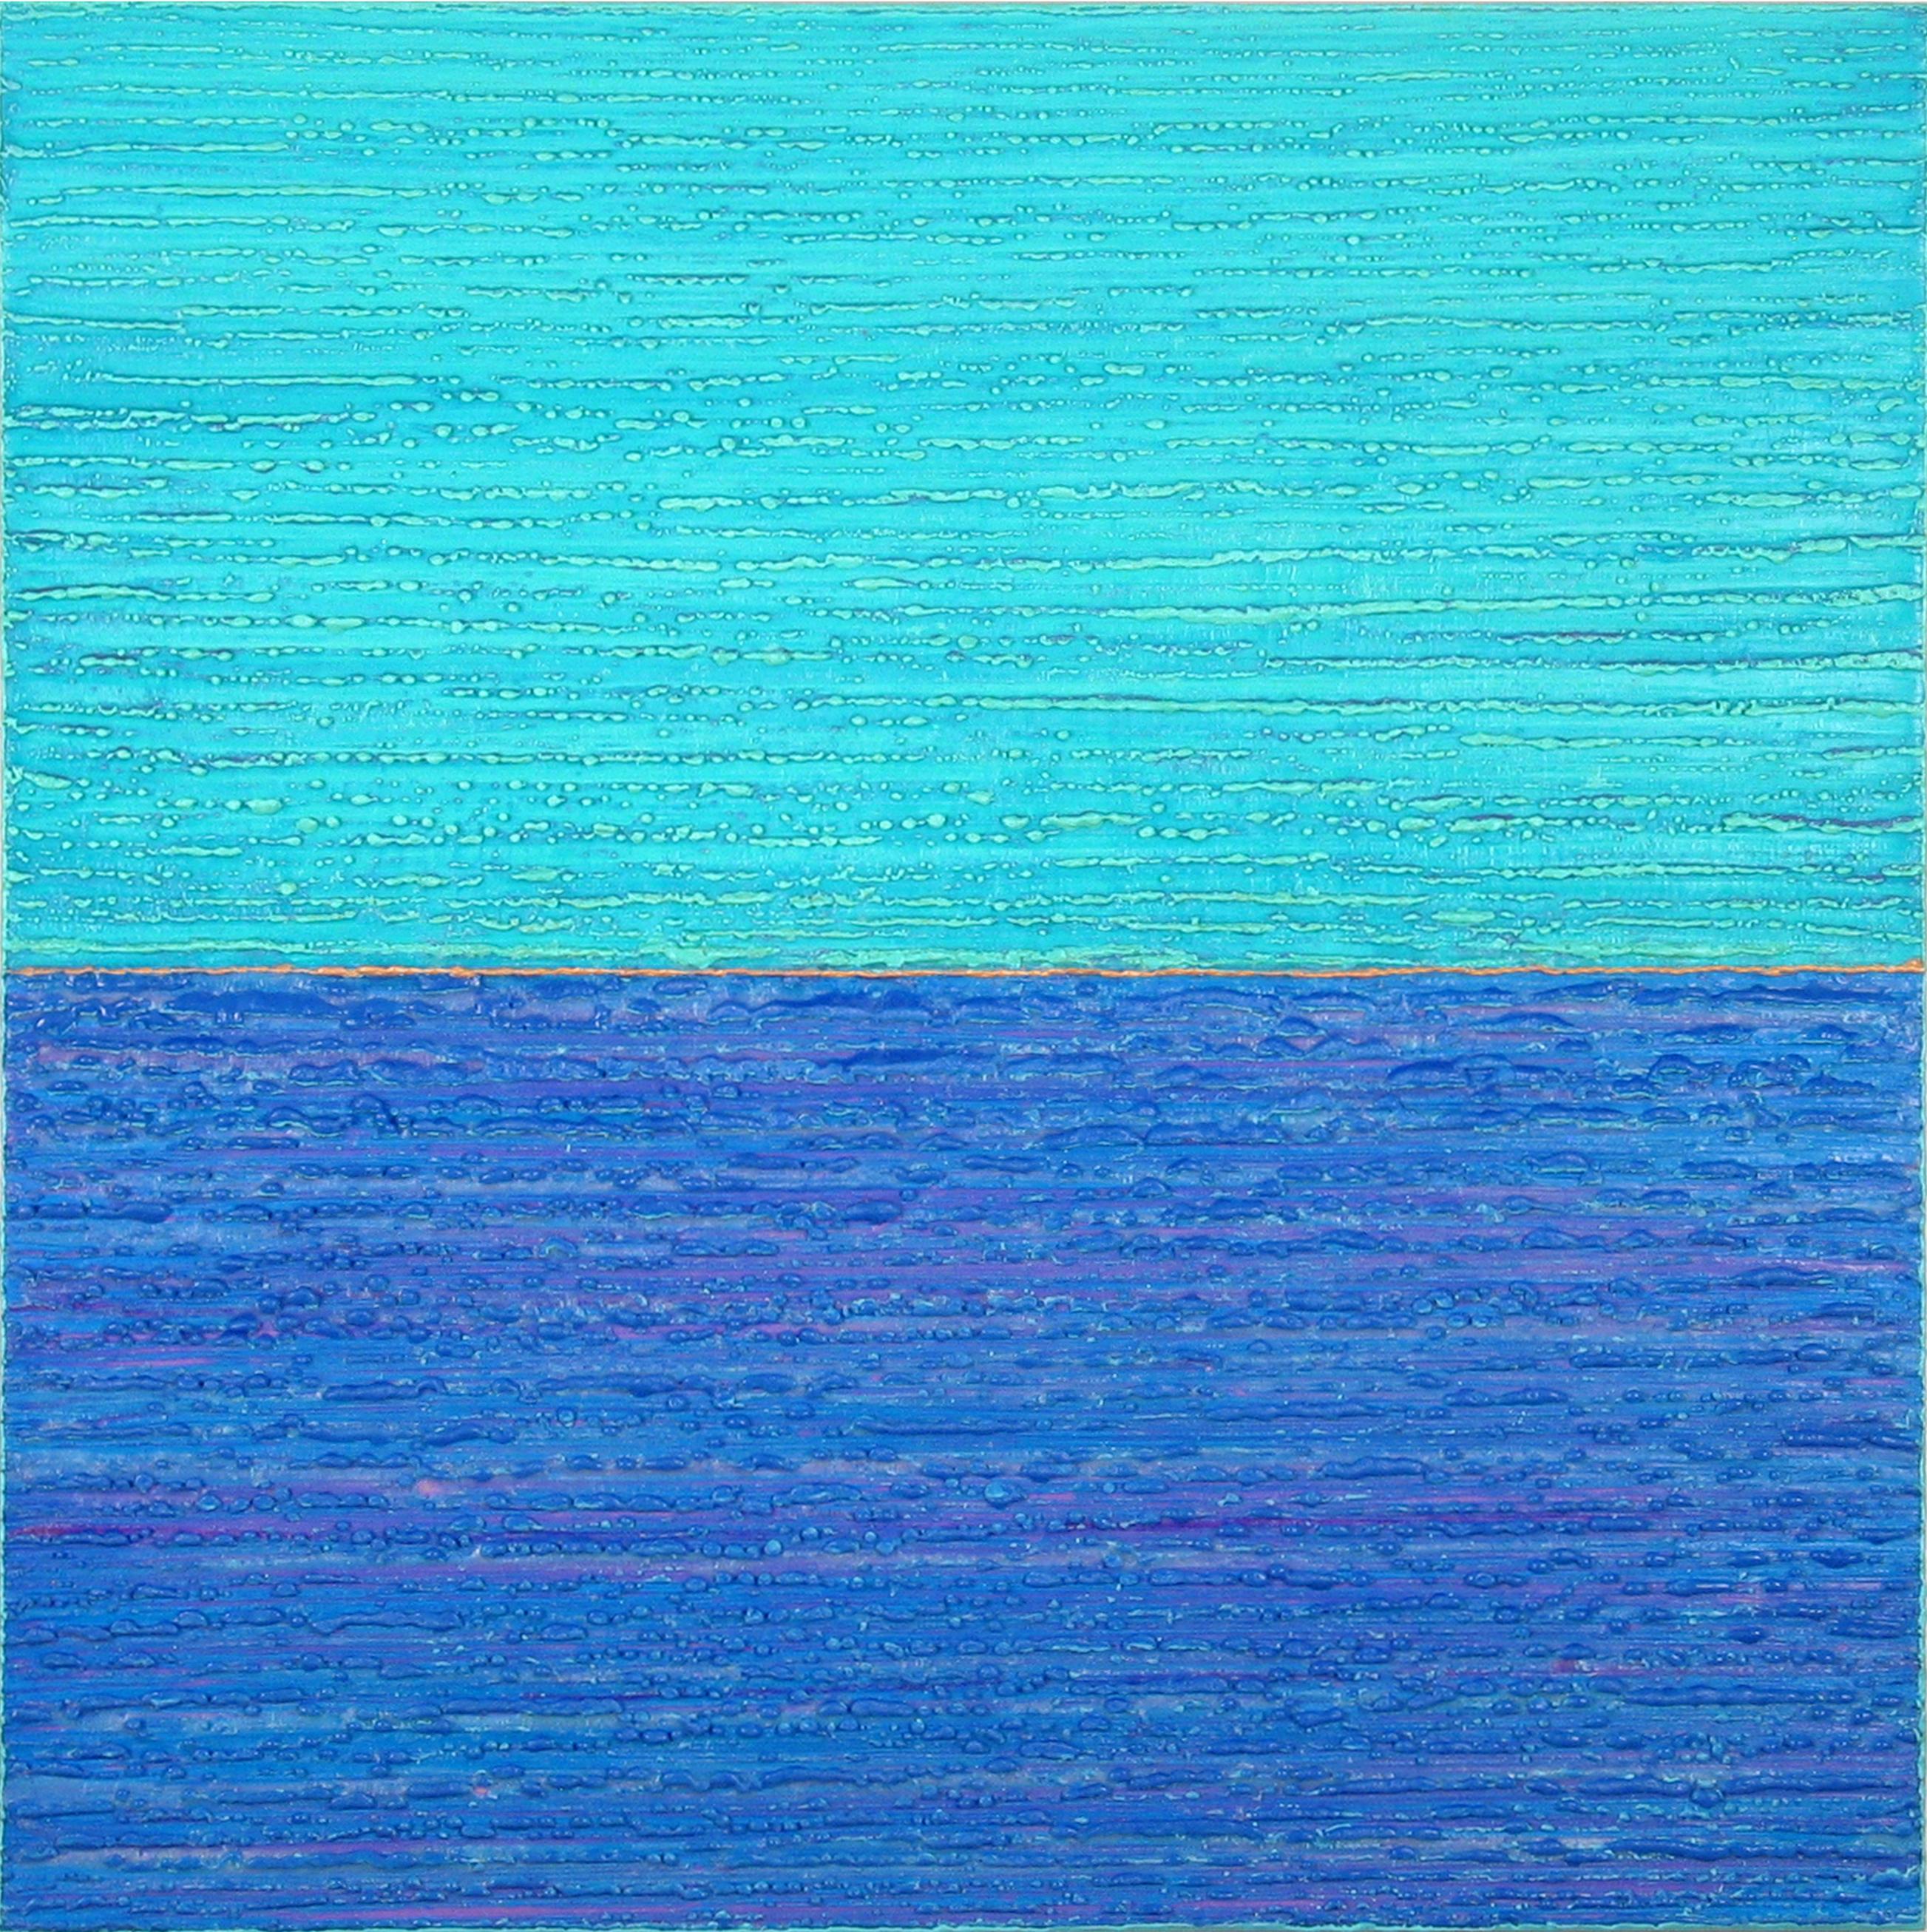 Joanne Mattera Abstract Painting - Silk Road 442, Cobalt Blue, Bright Electric Teal Square Color Field Encaustic